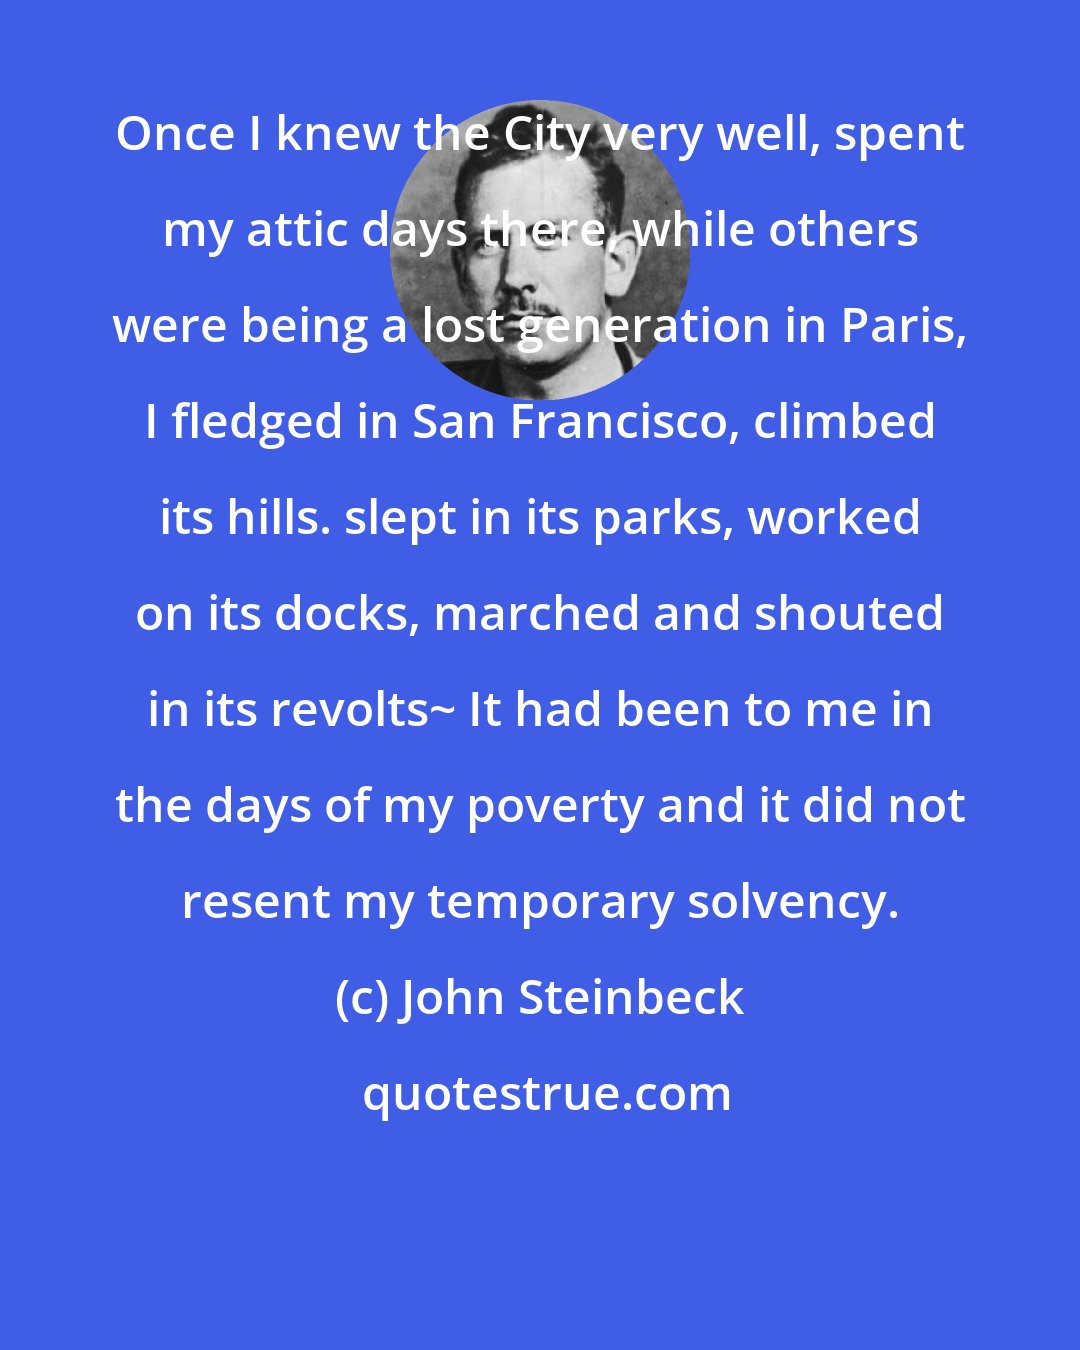 John Steinbeck: Once I knew the City very well, spent my attic days there, while others were being a lost generation in Paris, I fledged in San Francisco, climbed its hills. slept in its parks, worked on its docks, marched and shouted in its revolts~ It had been to me in the days of my poverty and it did not resent my temporary solvency.